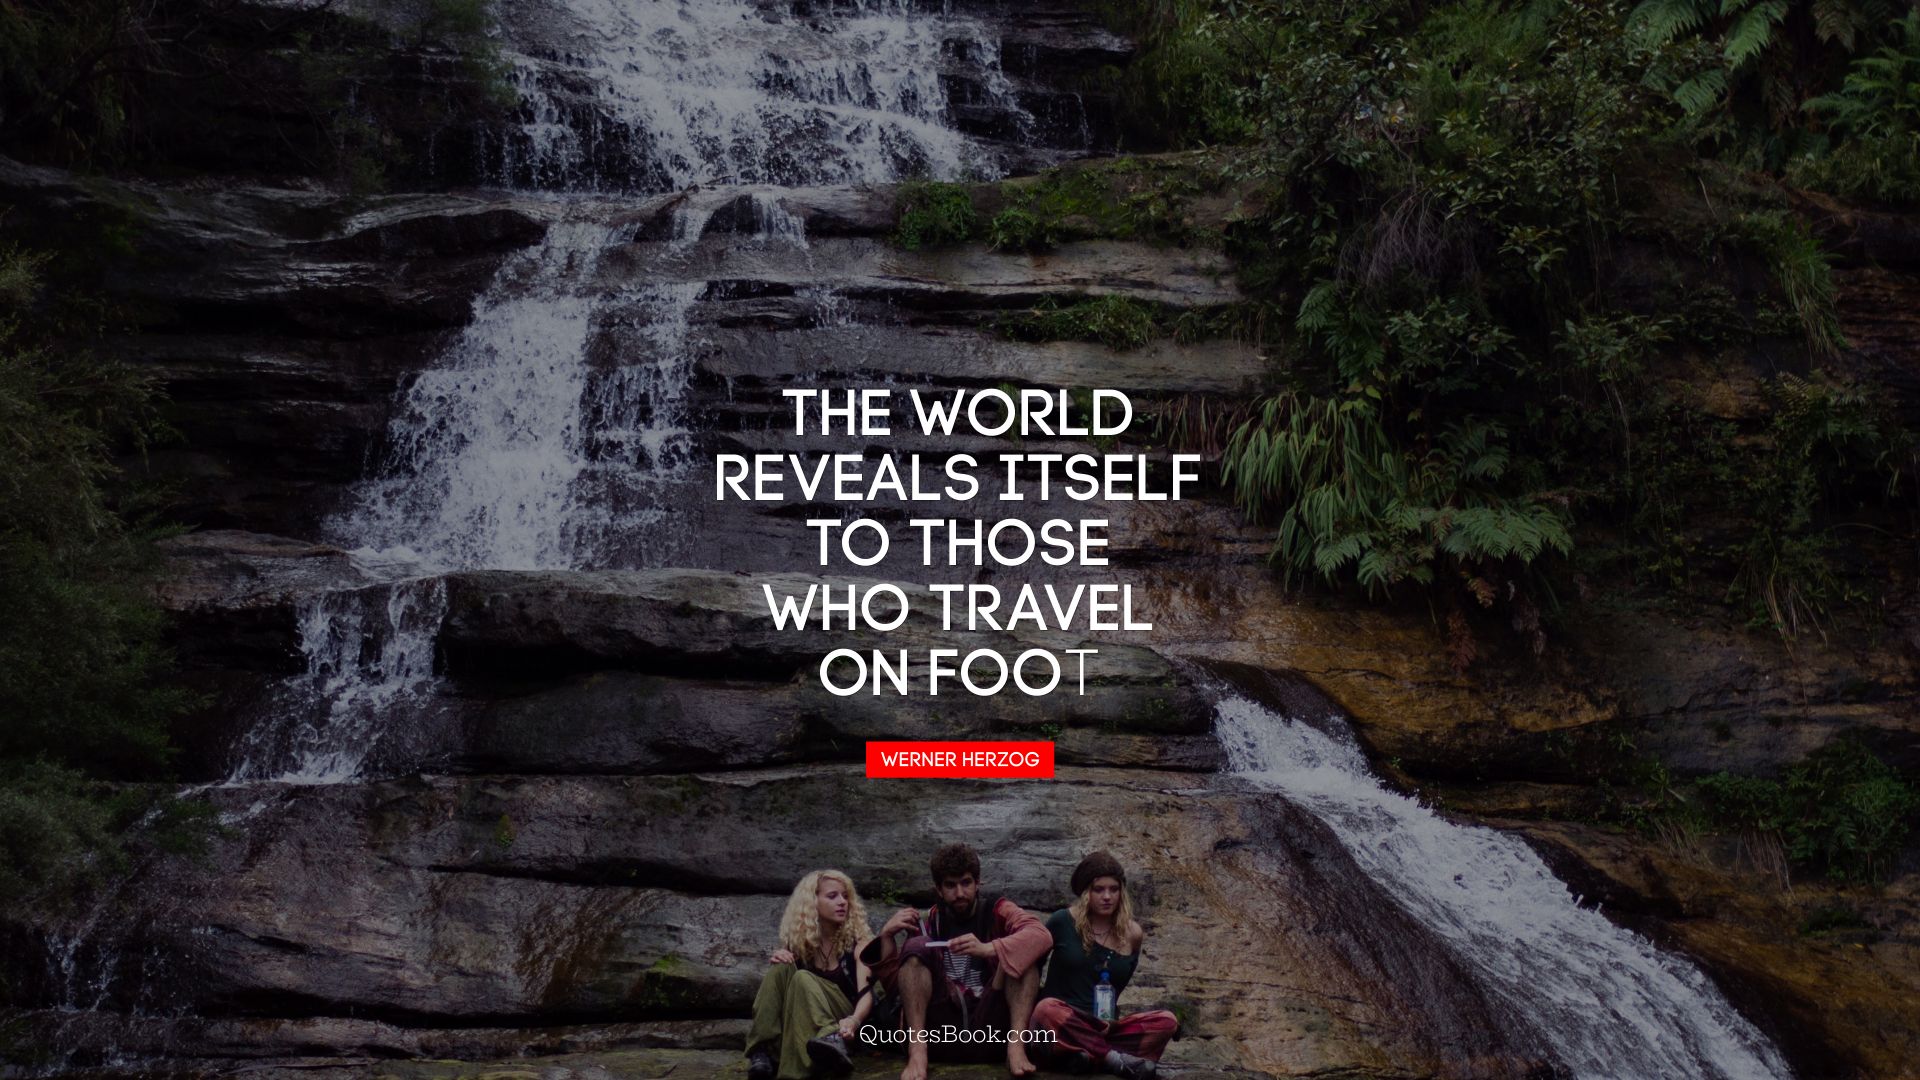 The world reveals itself to those who travel on foot. - Quote by Werner Herzog